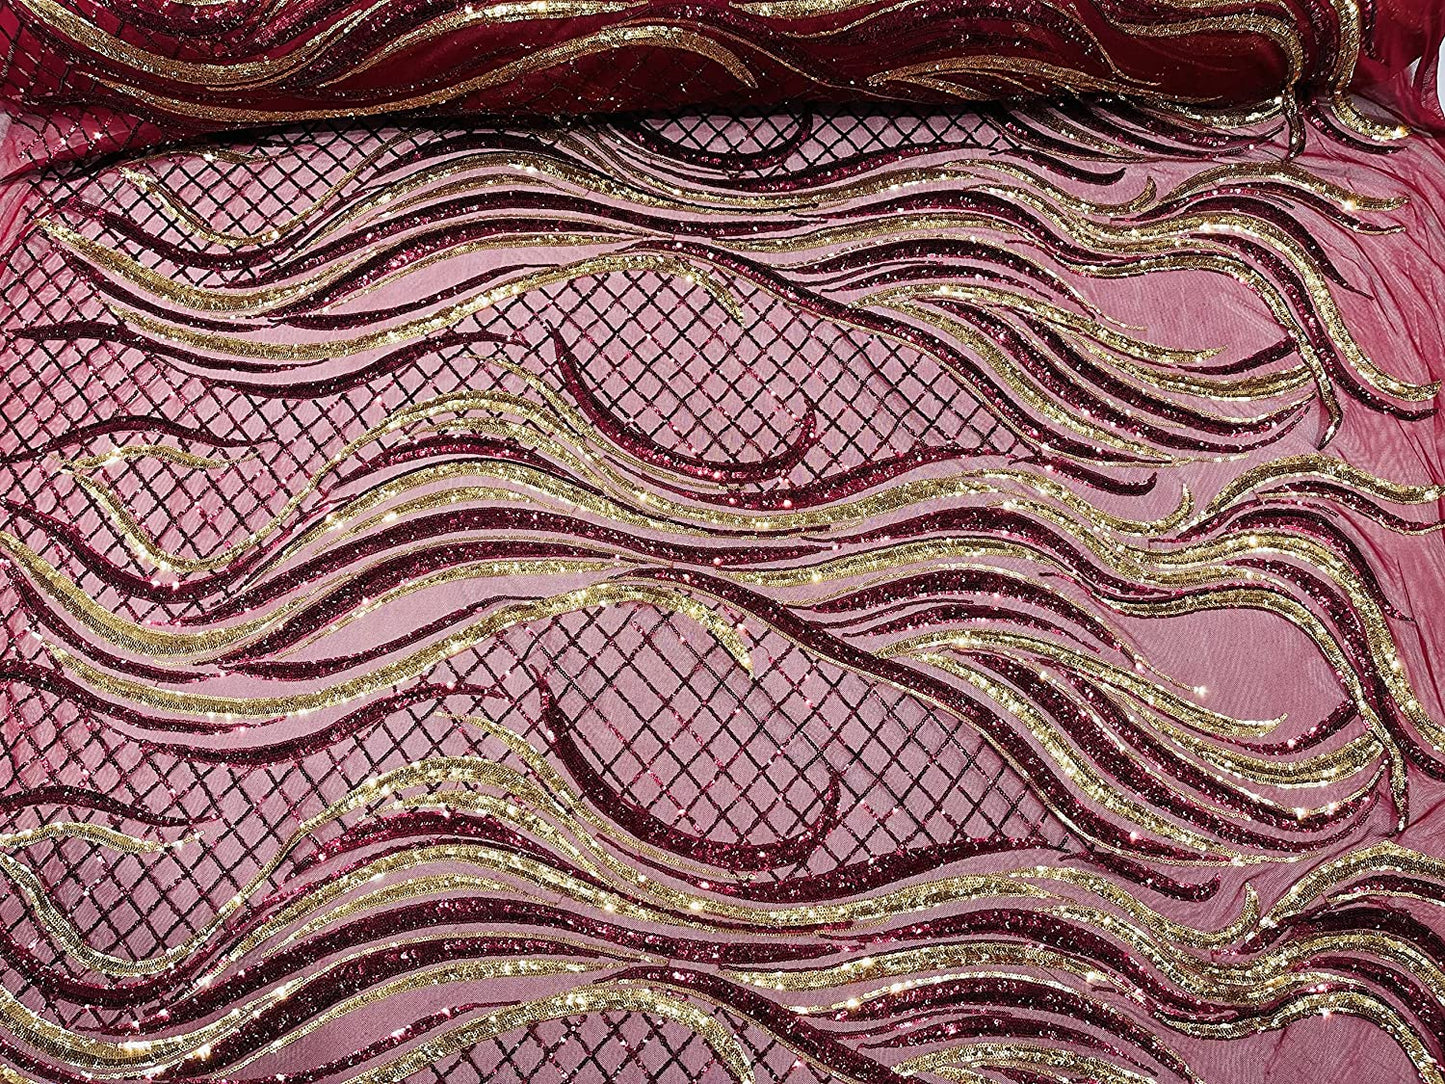 Sequin Flame Design On A 4 Way Stretch Mesh Fabric by The Yard (1 Yard, Gold/Burgundy)